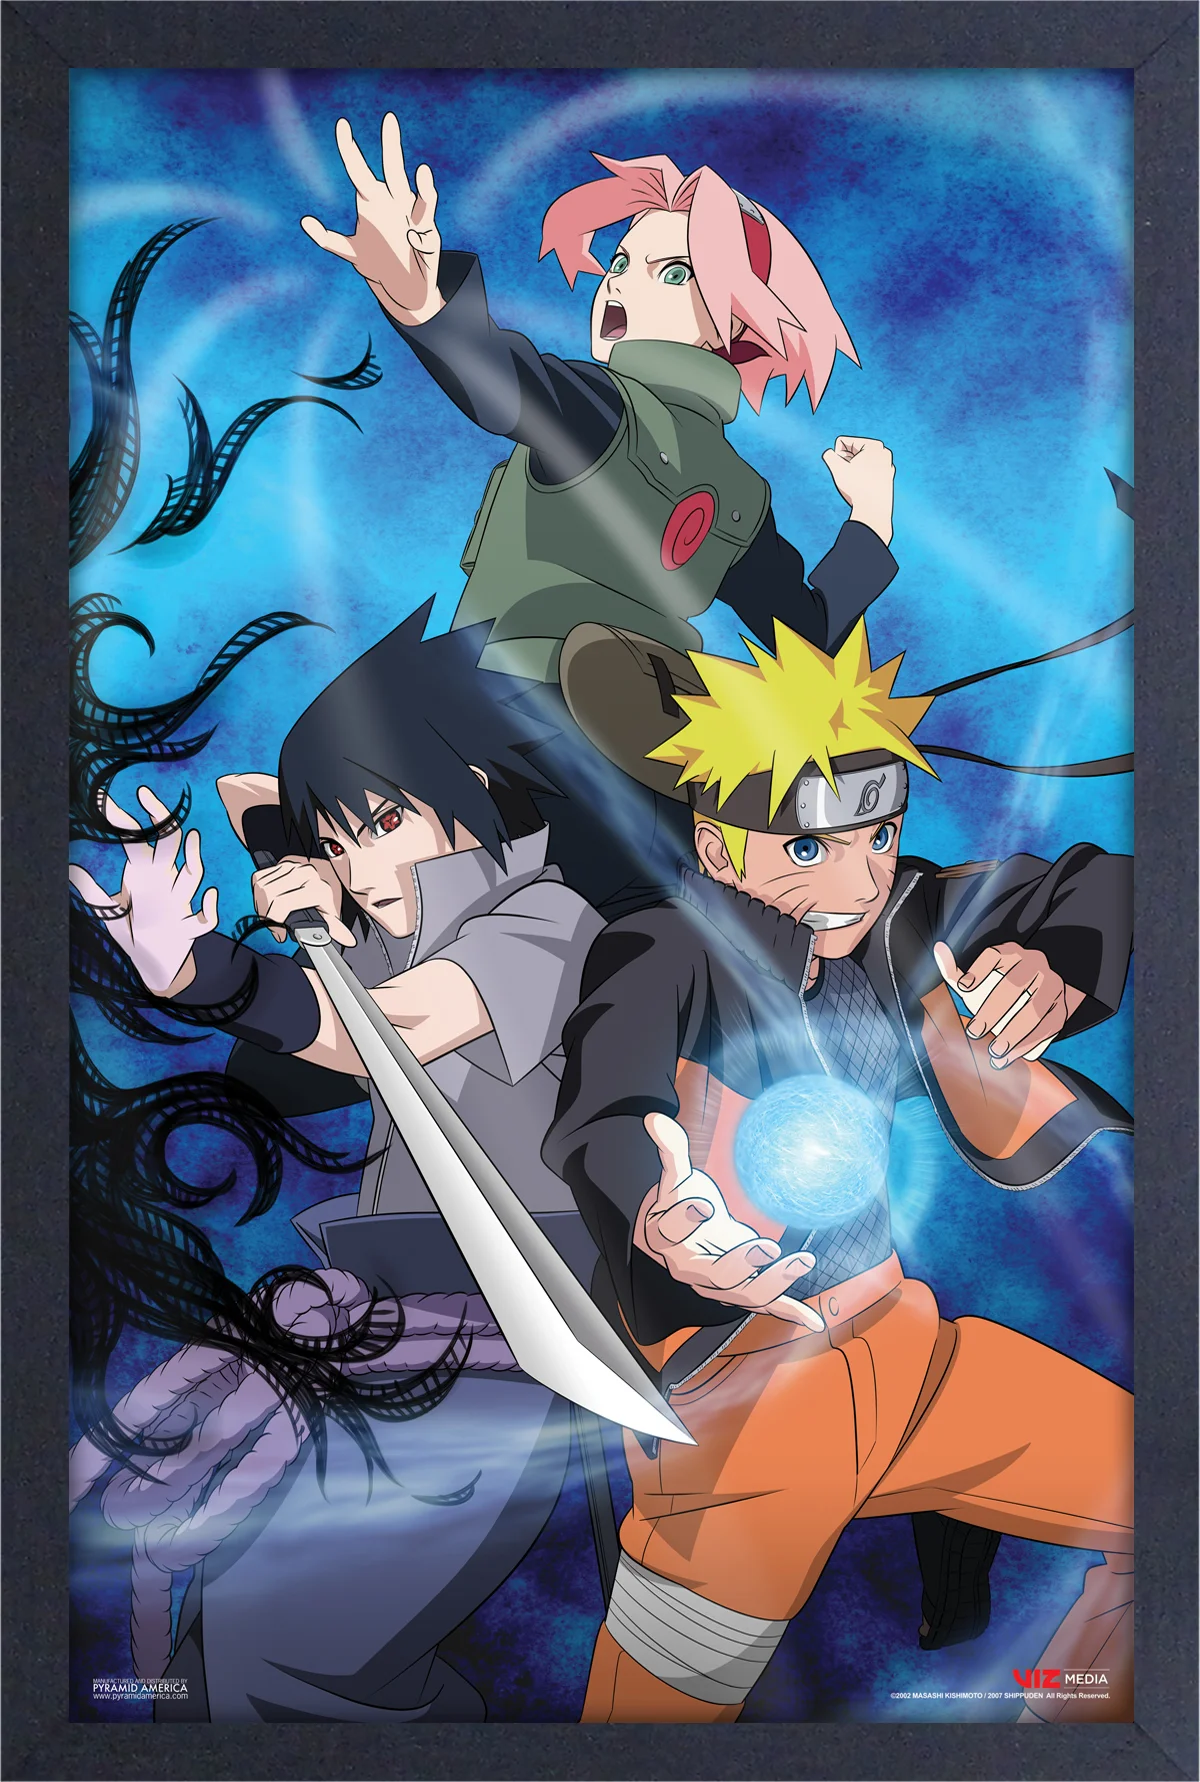 Naruto - Group Fight Pose (11"x17" Gel-Coat) (Order in multiples of 6, mix and match styles)